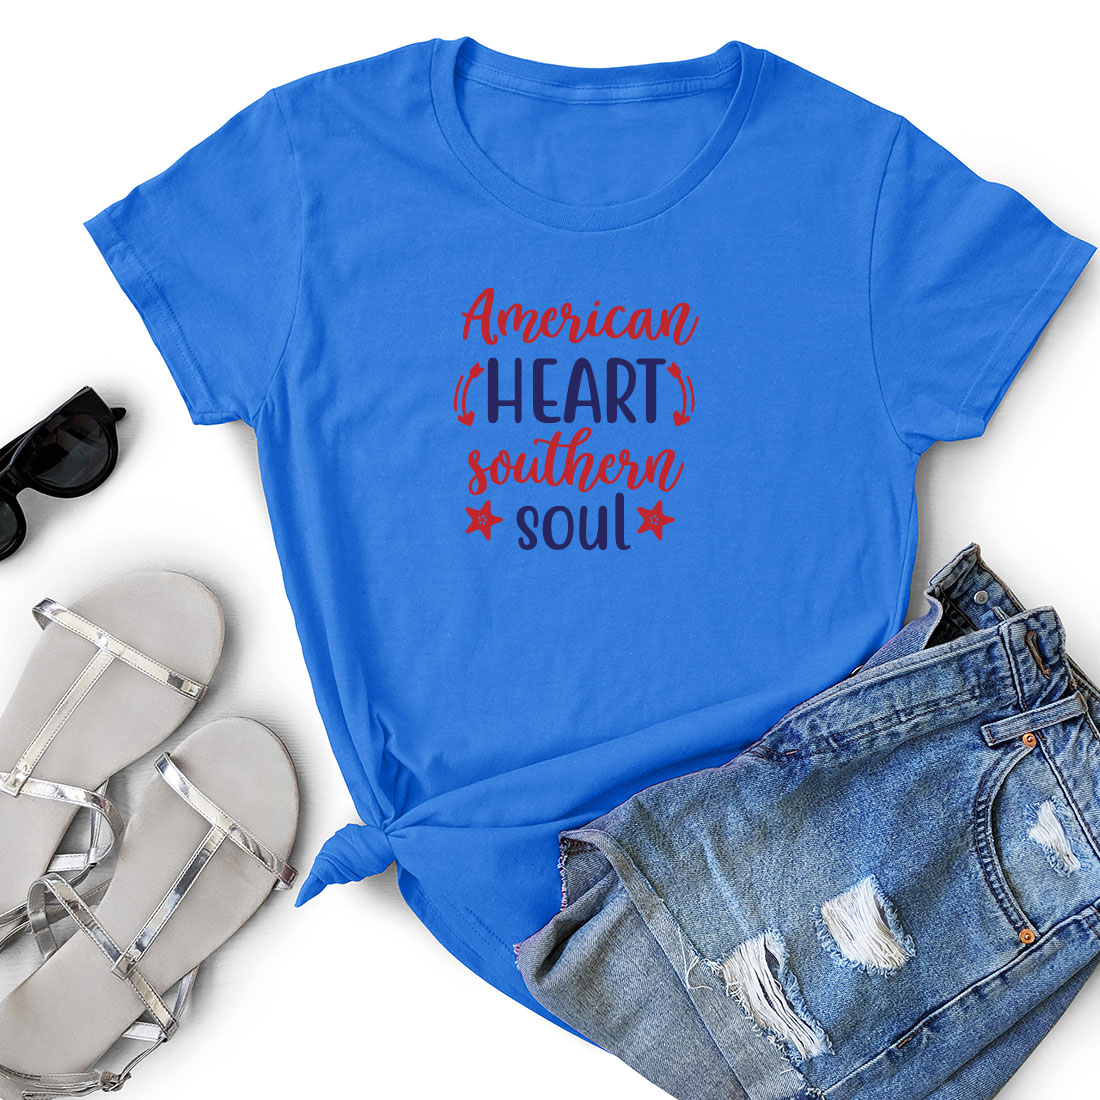 T - shirt that says american heart southern soul.